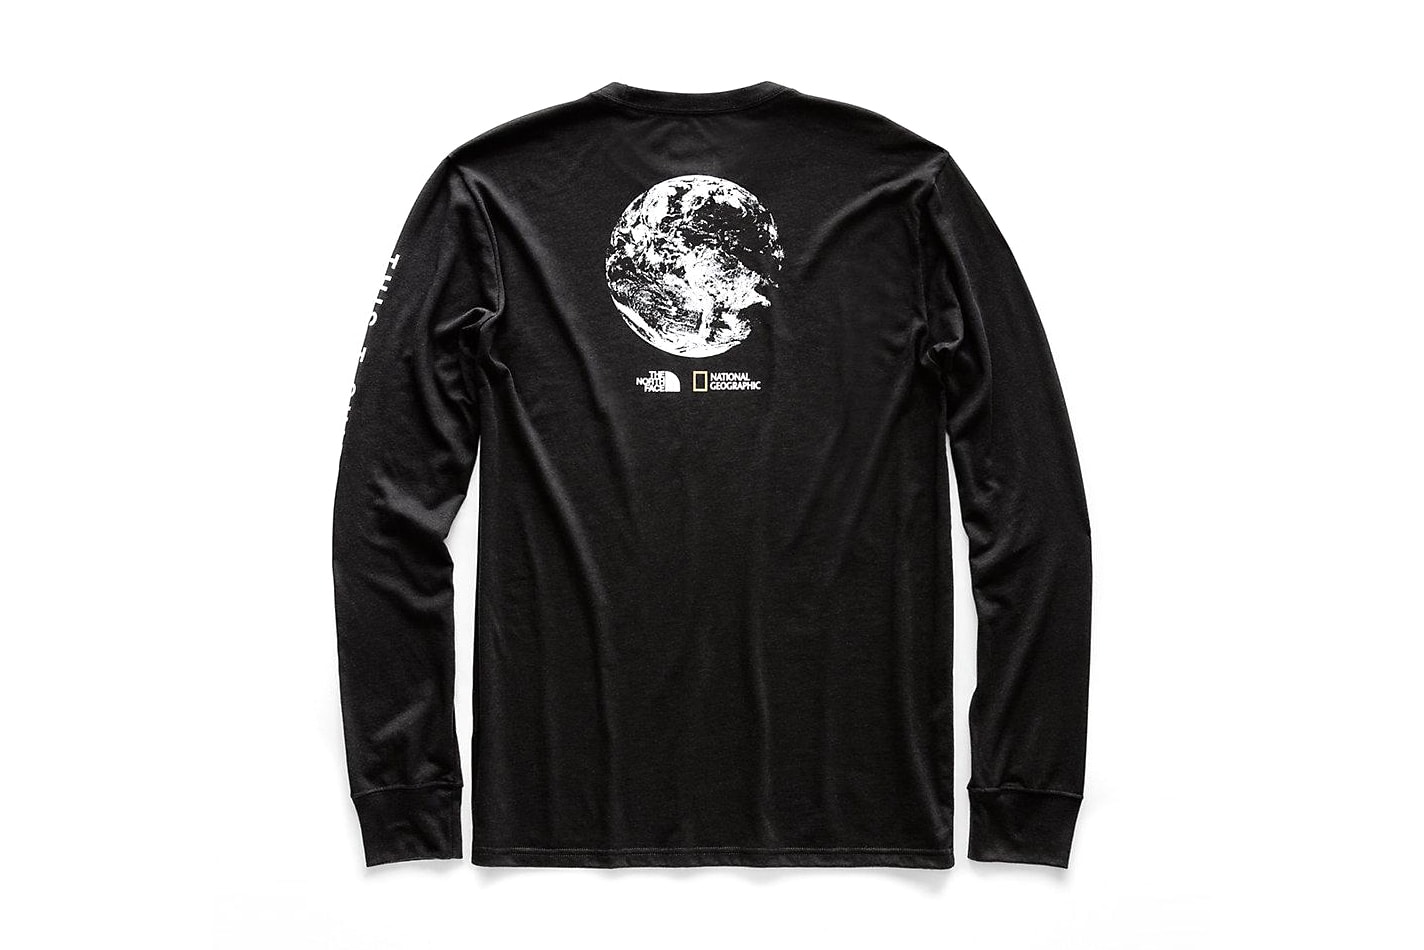 national geographic north face bottle source collaboration tee shirts limited edition long sleeve black graphic